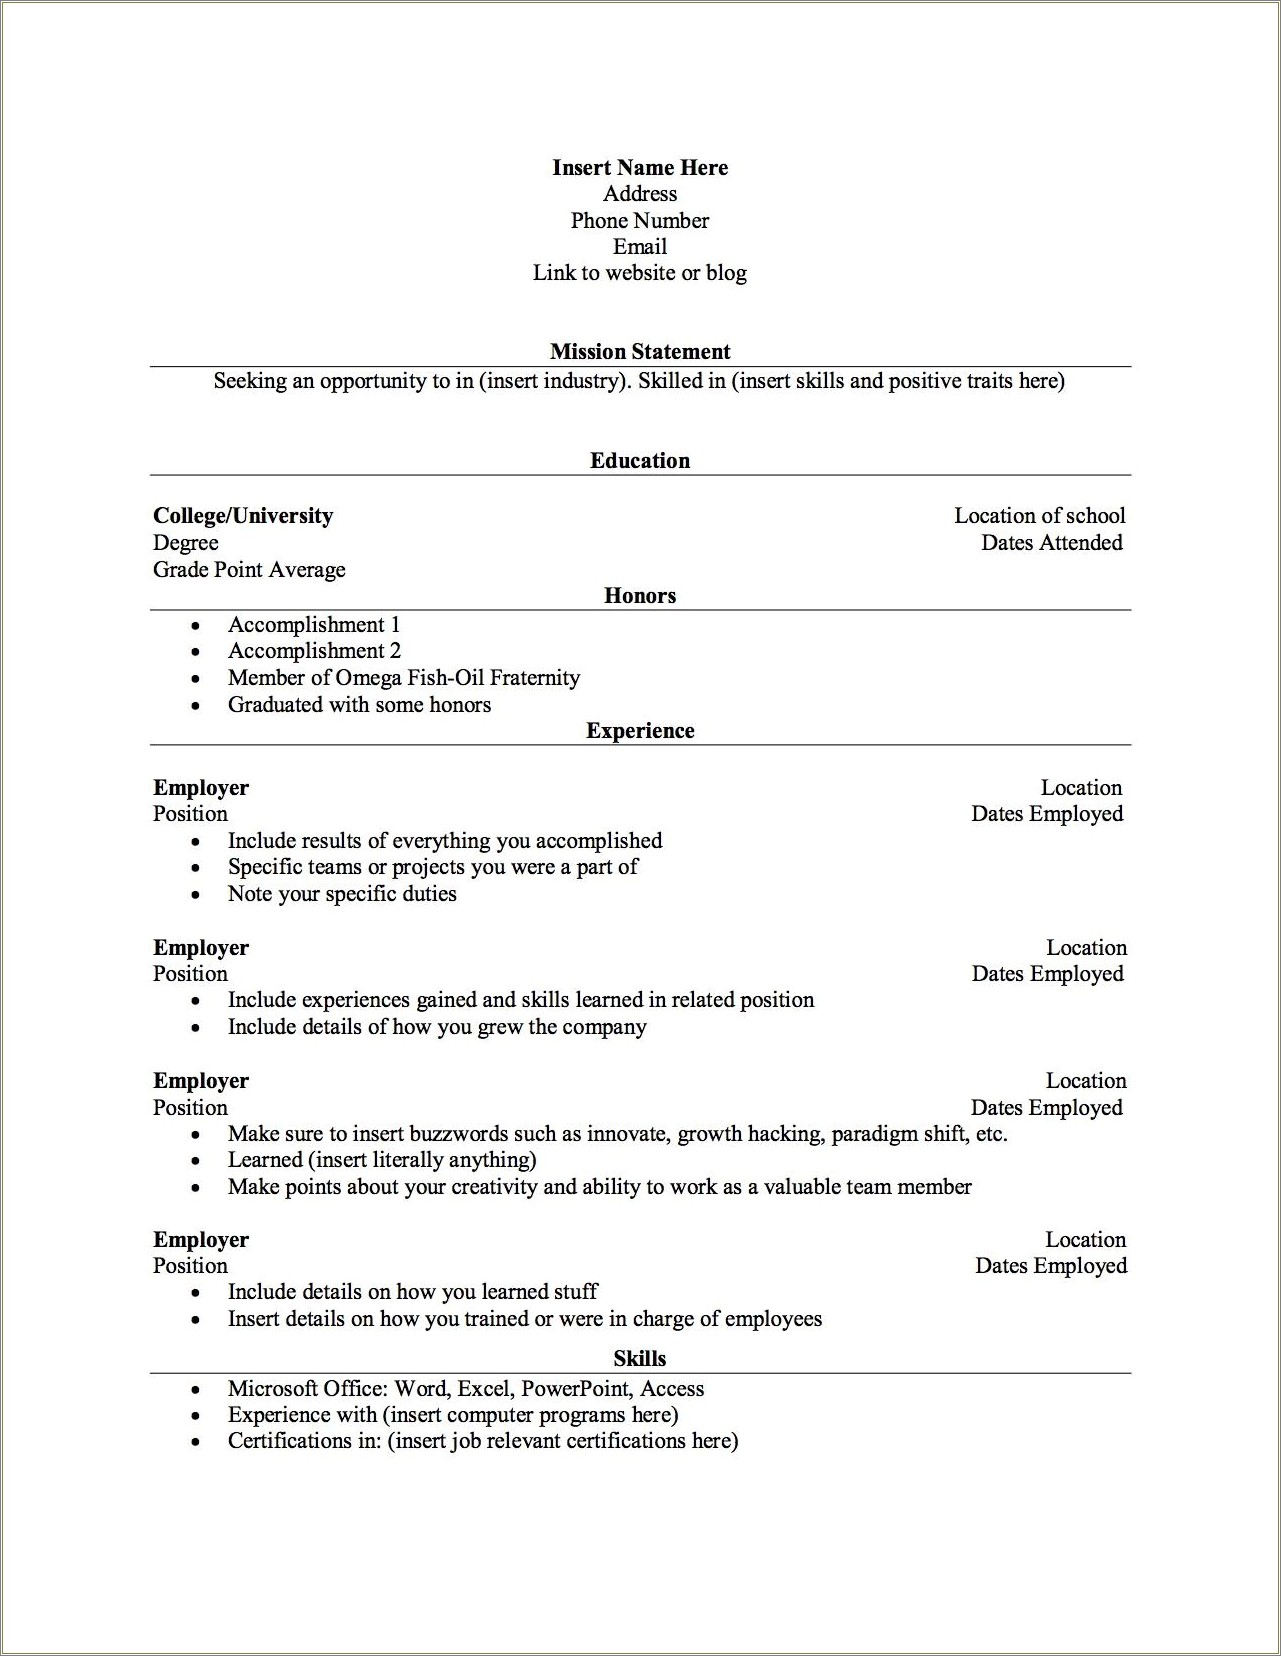 Resume For Job Interviews On Campus